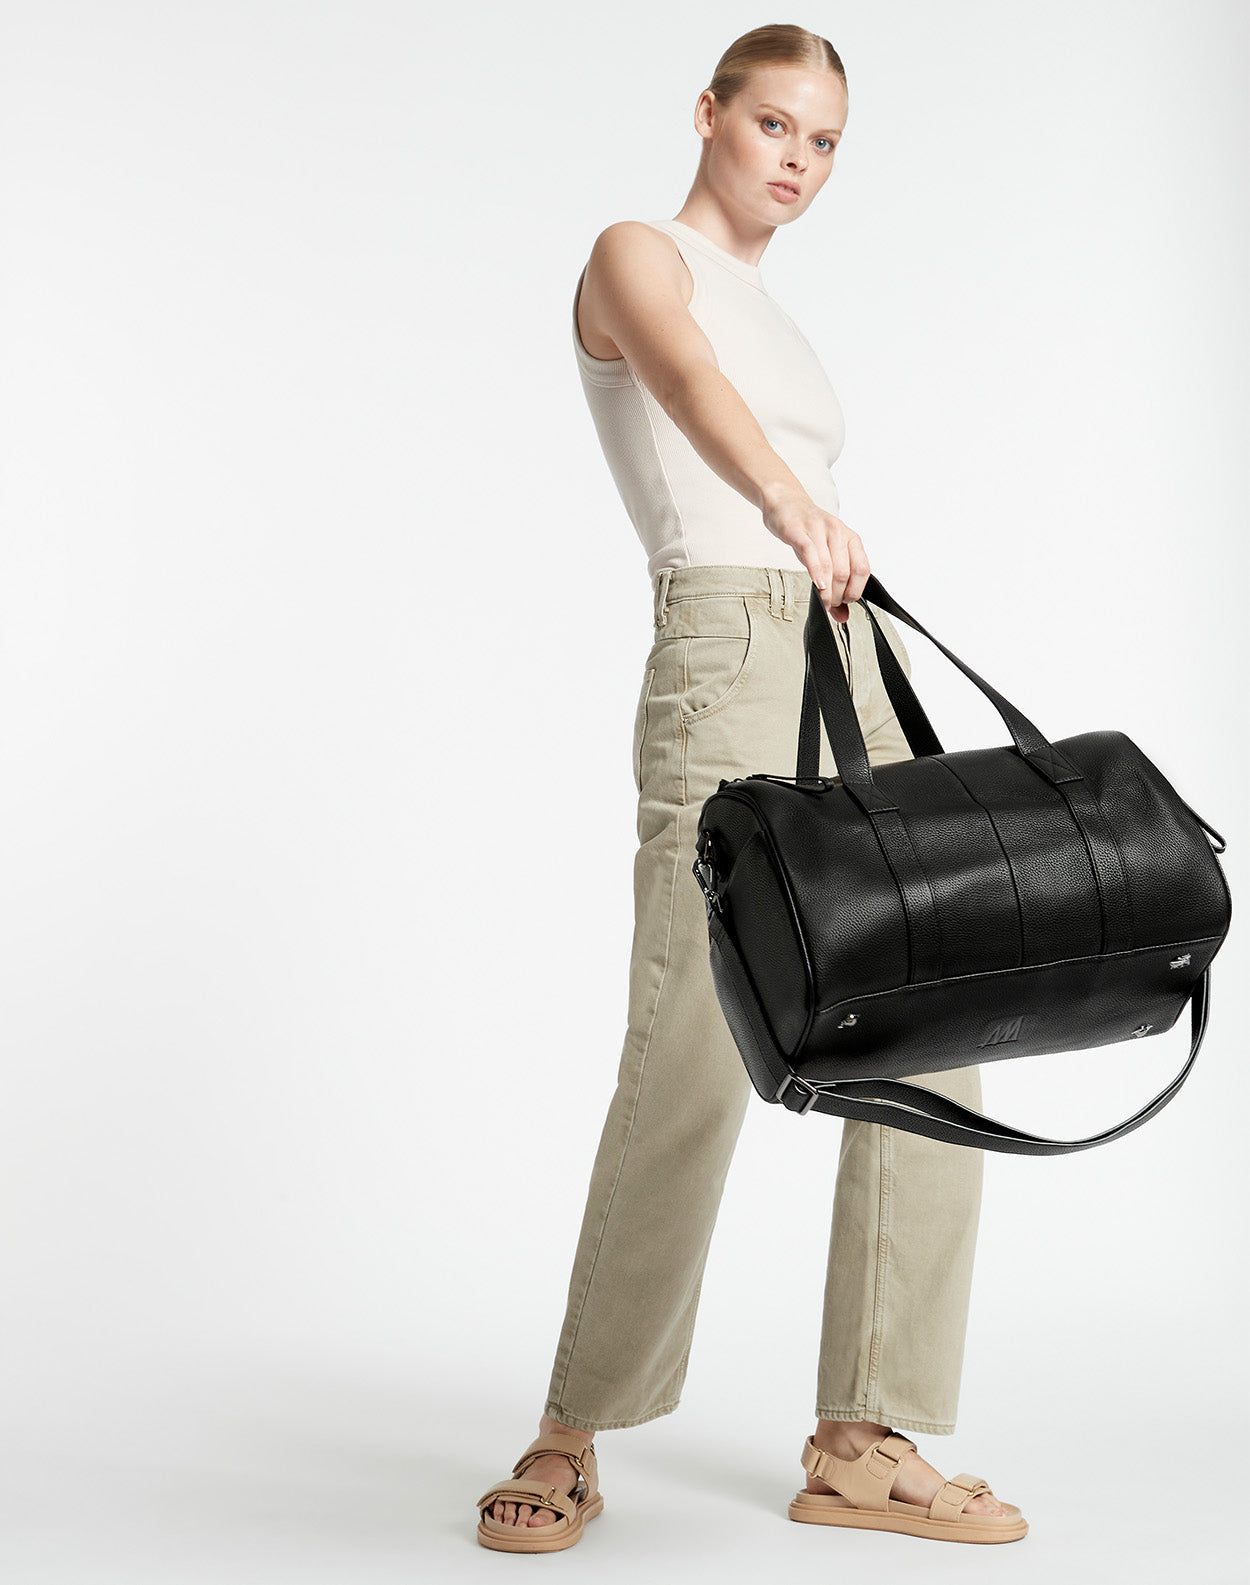 Women's Leather Duffle Bags | Status Anxiety®